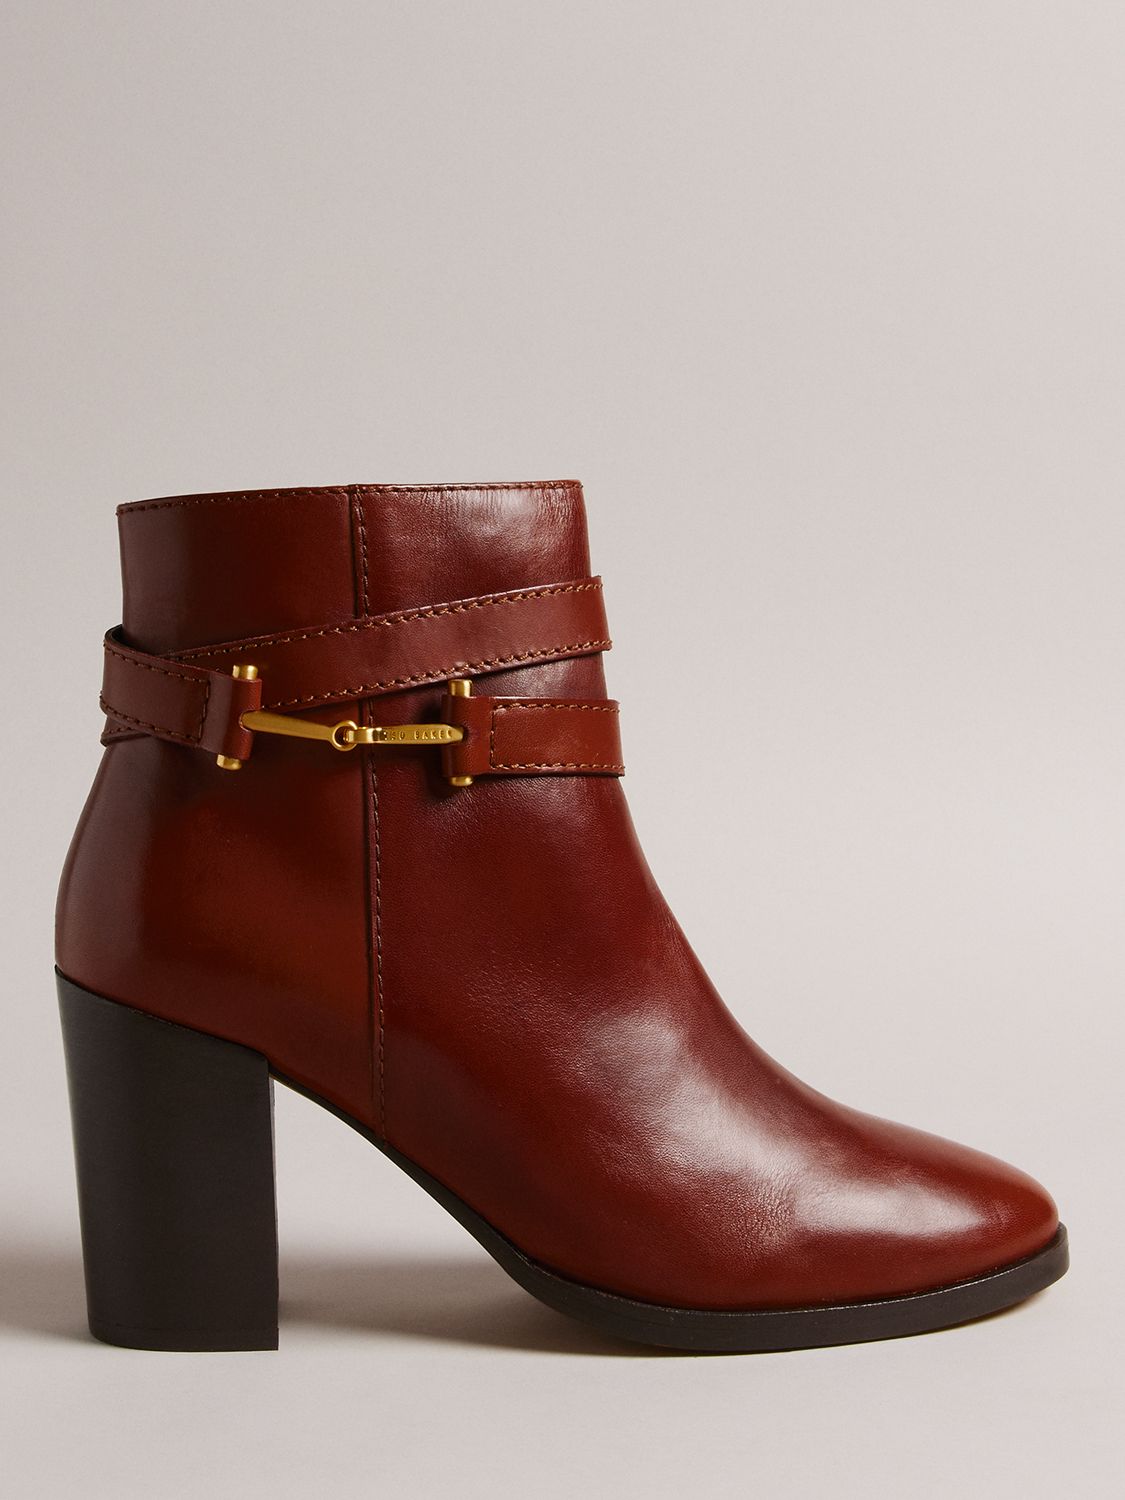 Ted Baker Anisea High Block Heel Leather Ankle Boots, Tan at John Lewis ...